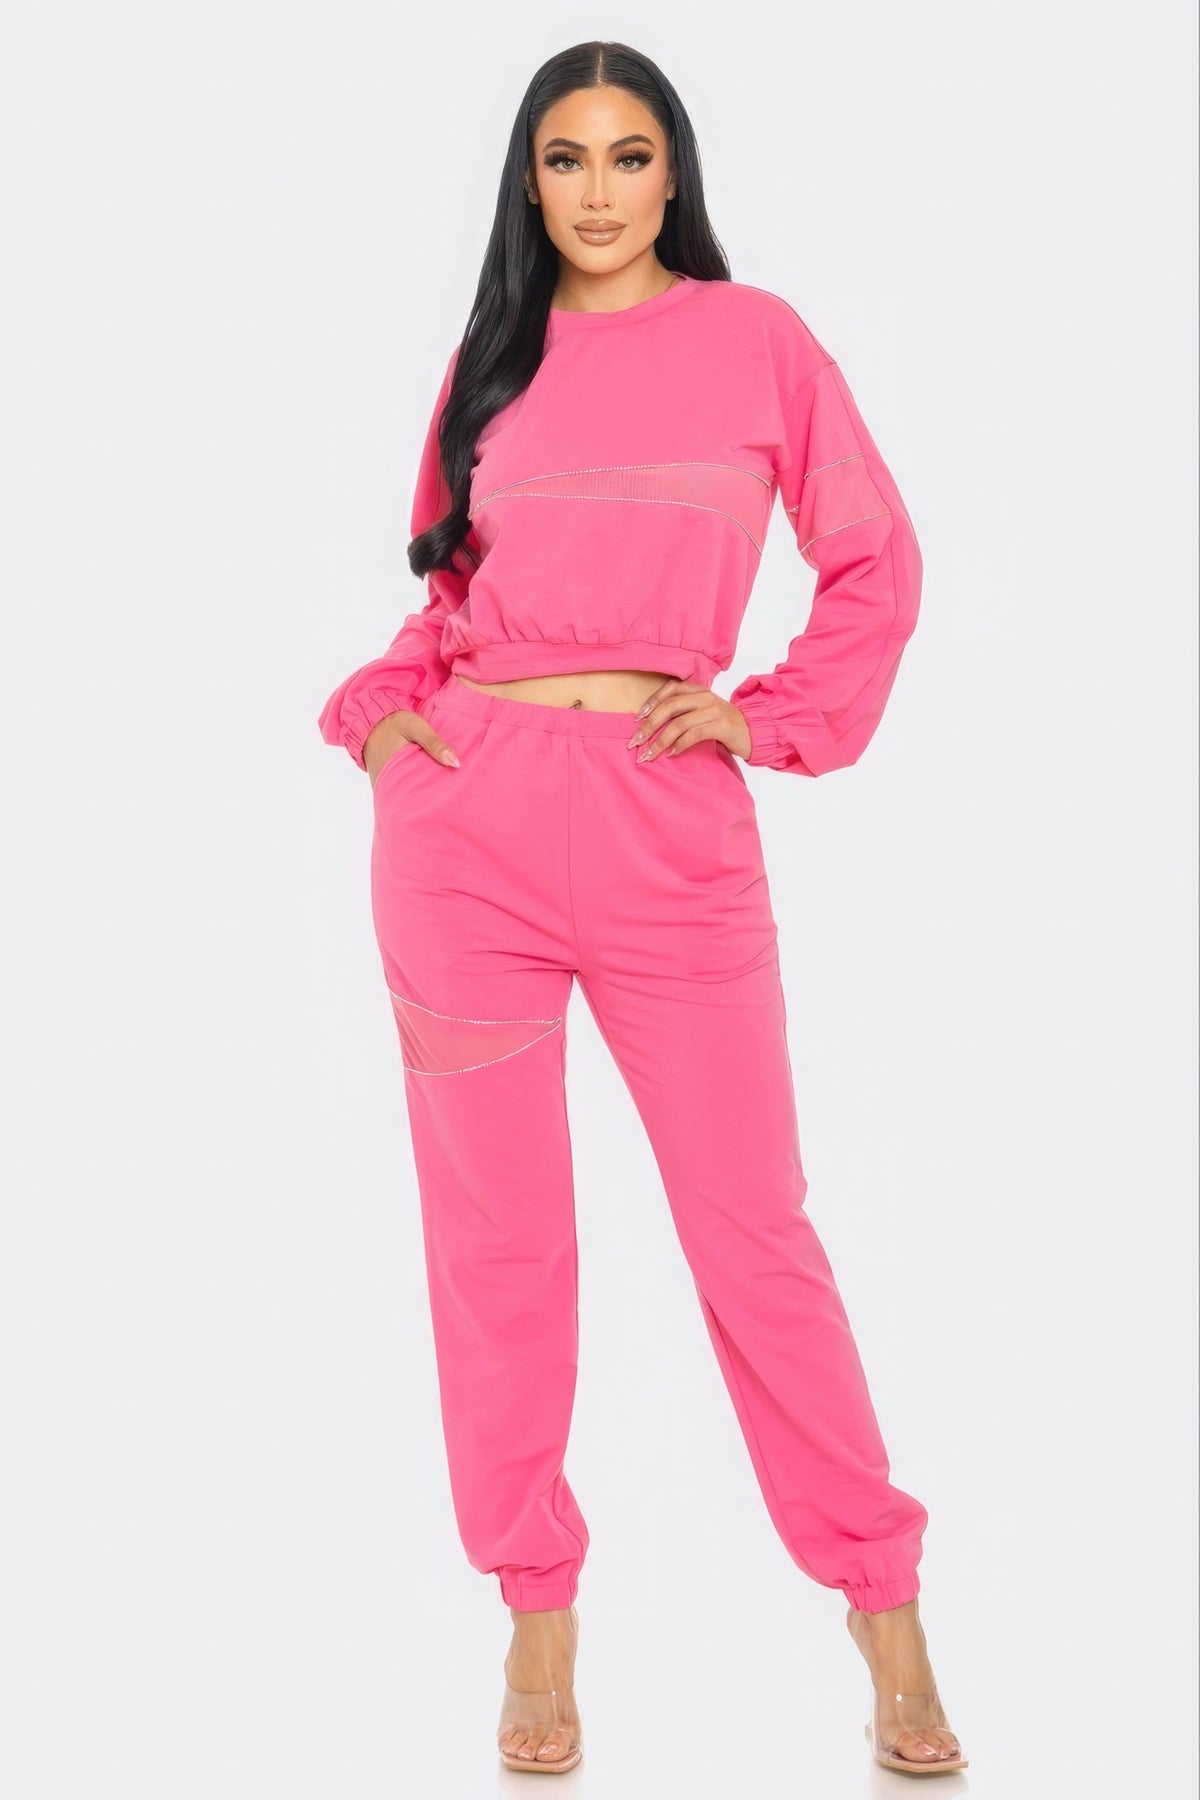 Fashion Outift Set Sweater and Sweatpants Jogger Two Piece  Pink with Rhinestone Detail Sport Fashion  and Loungewear